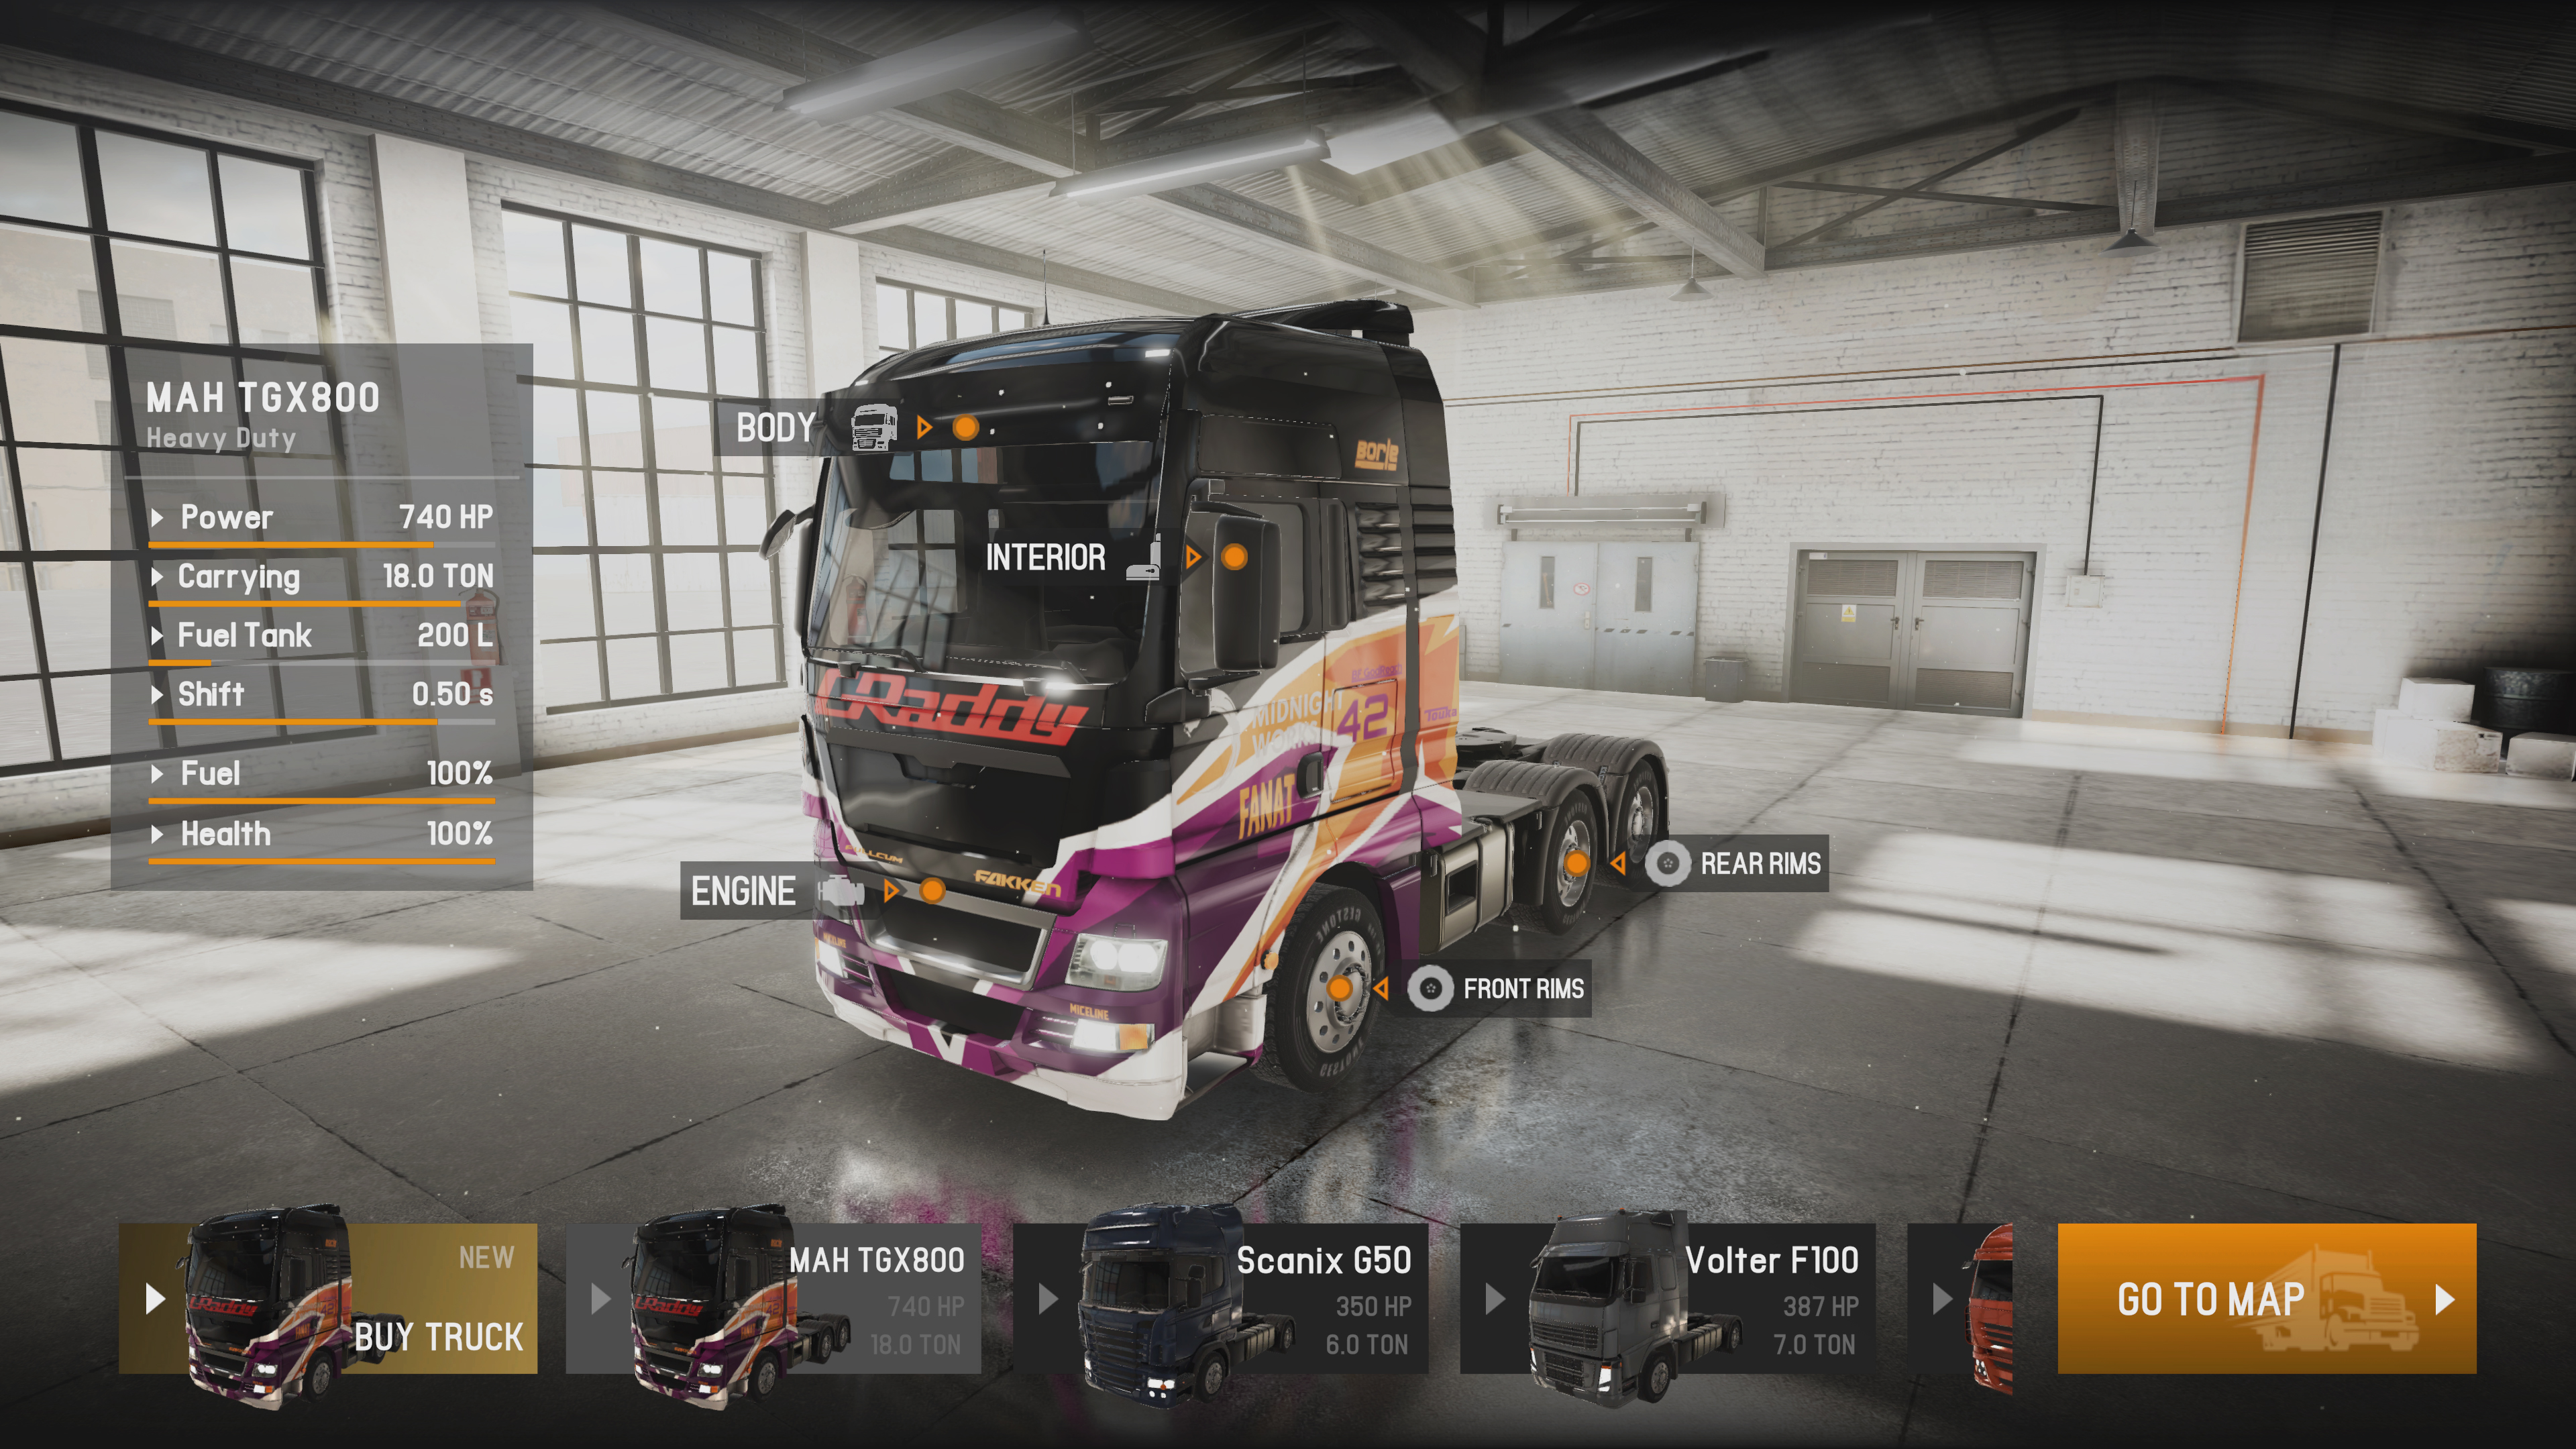 Is Euro Truck Simulator 2 Coming Out on PS4? Release Date News -  GameRevolution